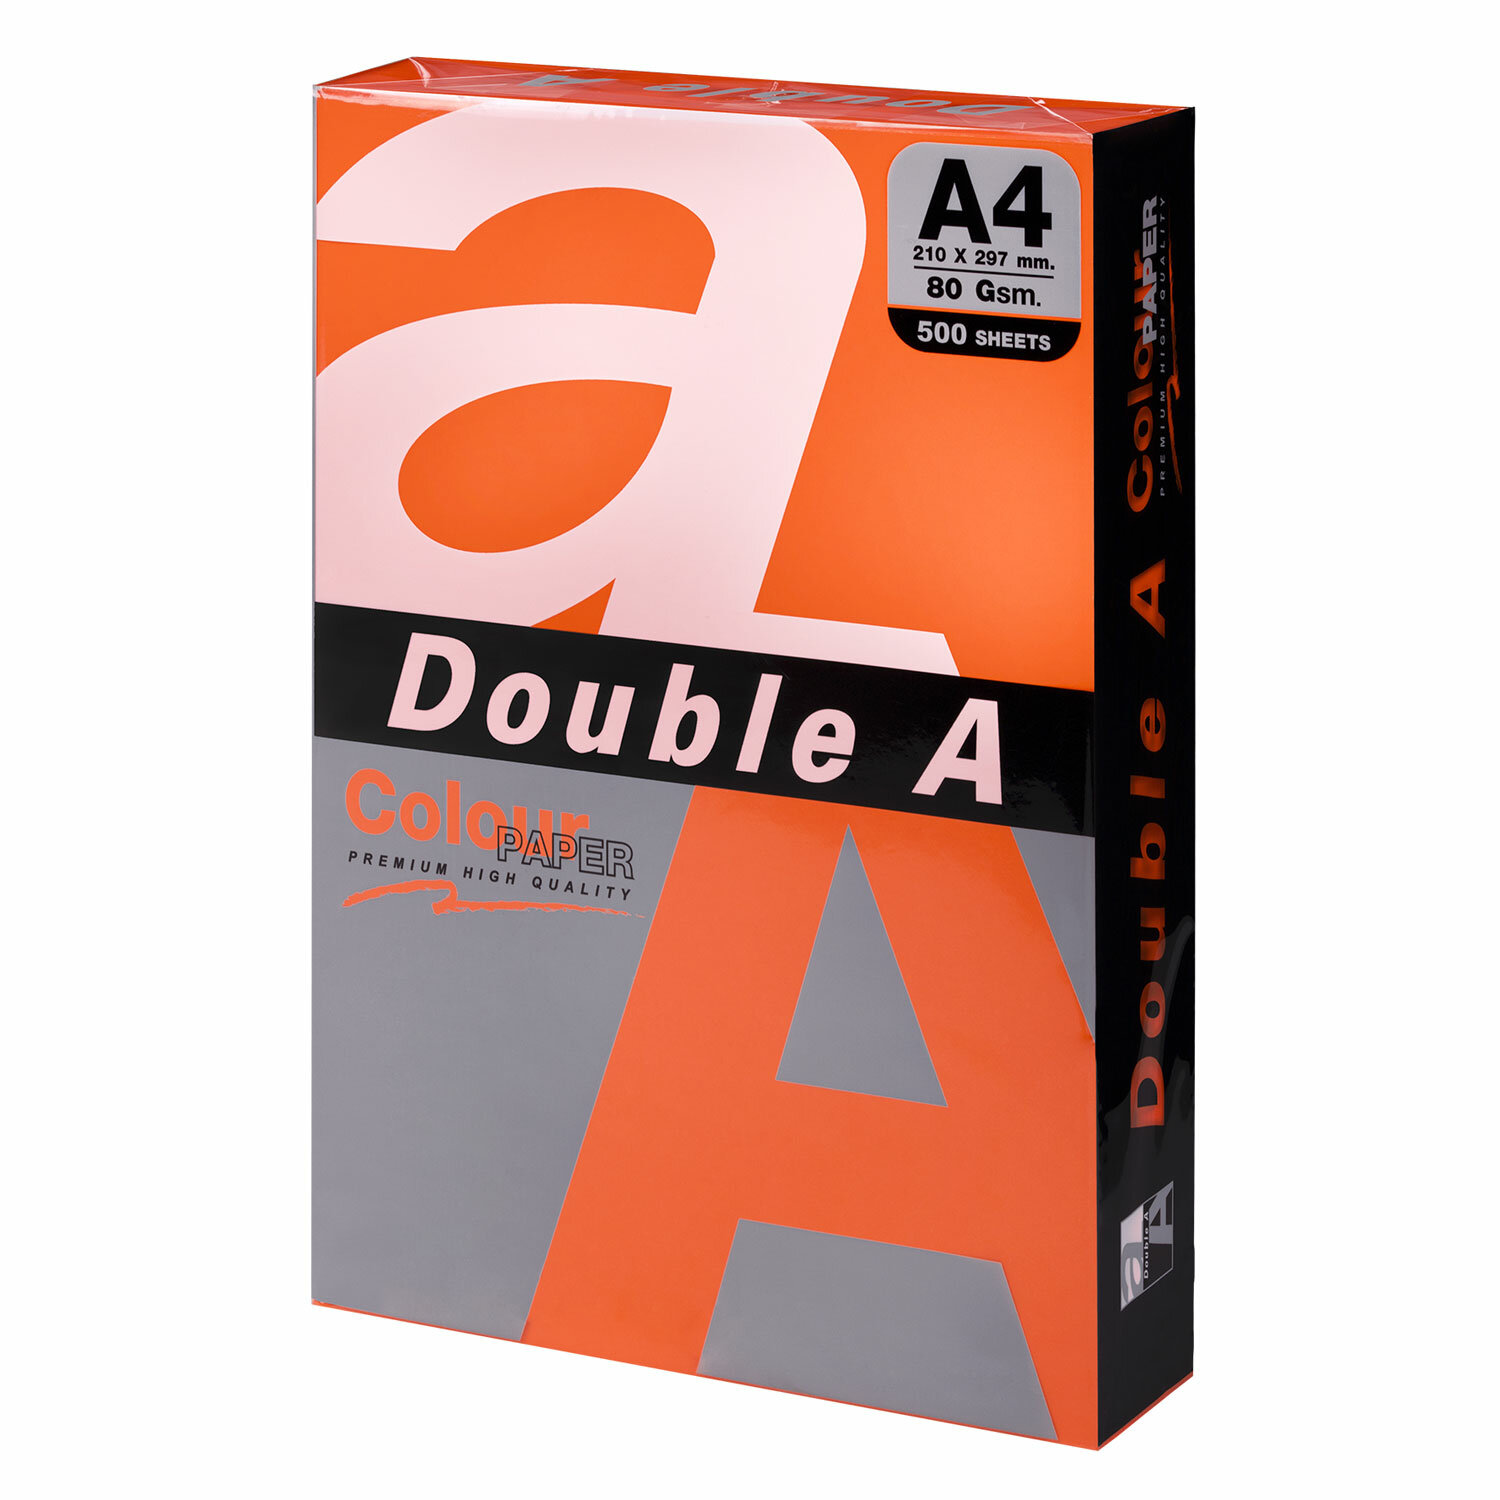   DOUBLE A 4, 80 /2, 500 , , 